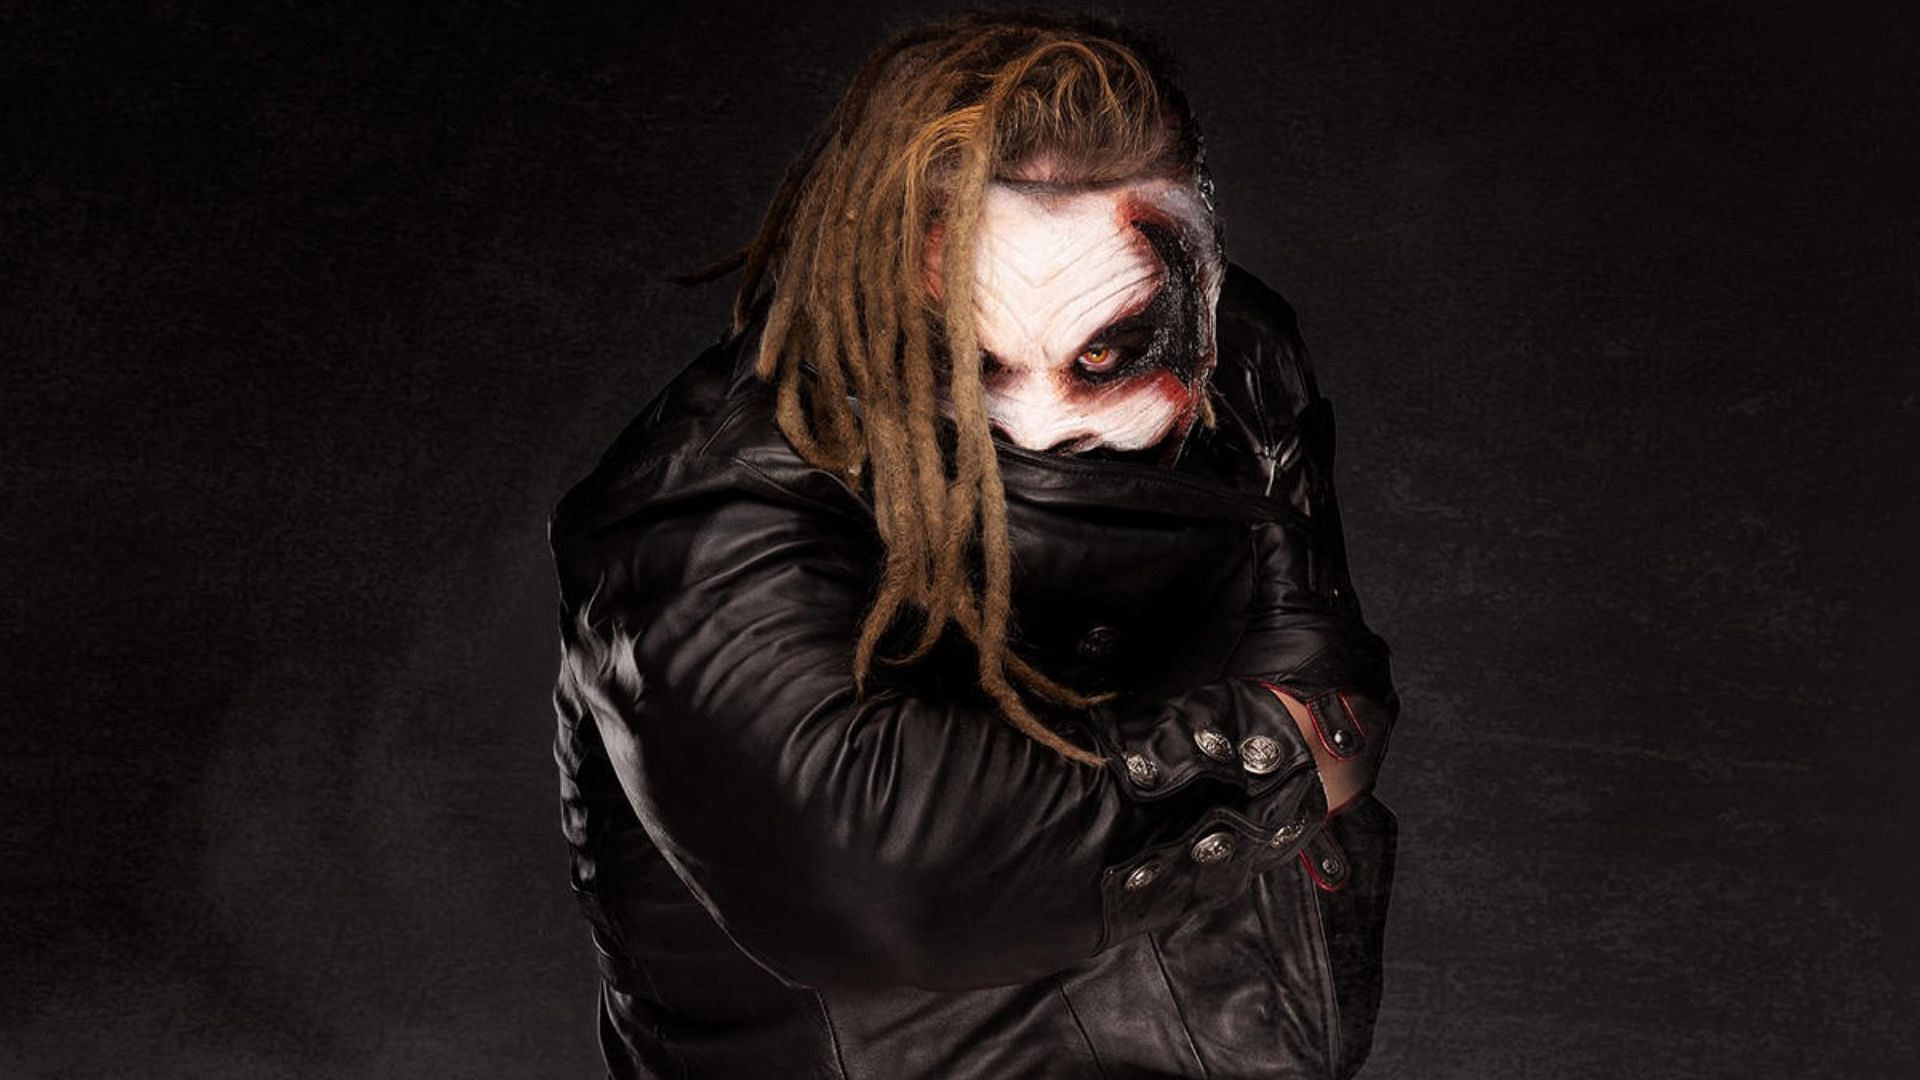 Bray Wyatt debuted The Fiend character in 2019.